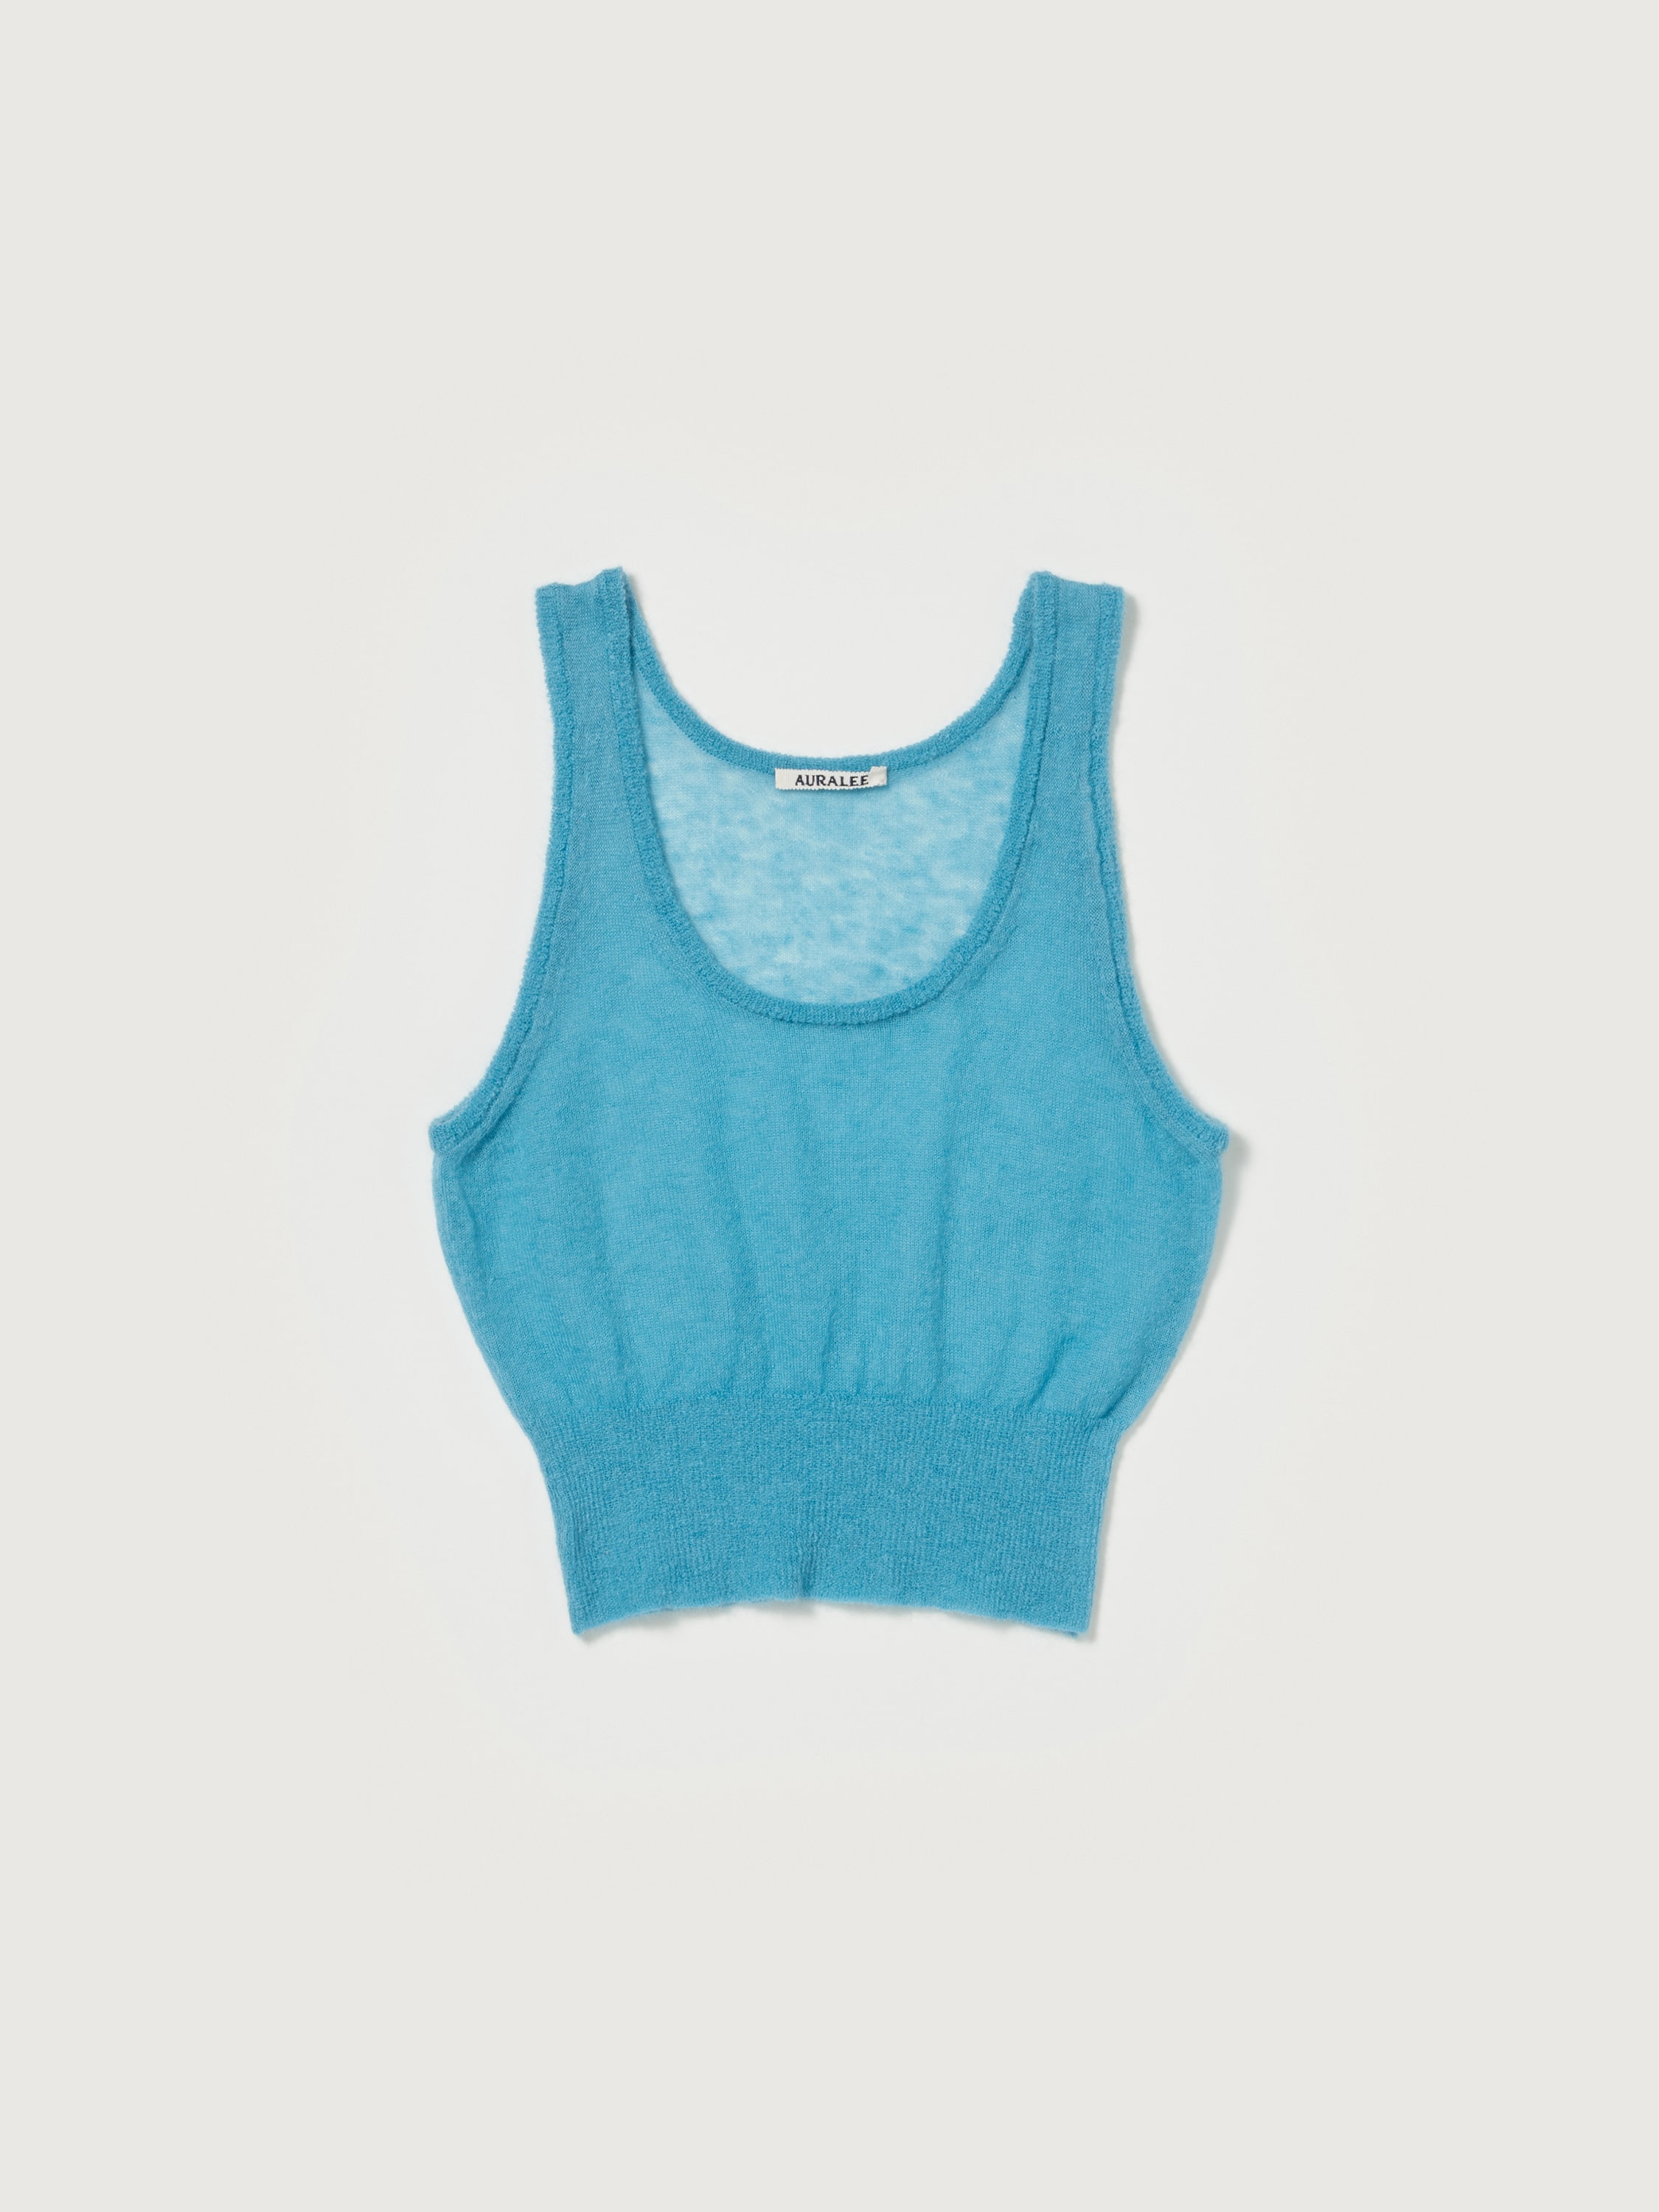 KID MOHAIR SHEER KNIT TANK 詳細画像 TURQUOISE BLUE 1